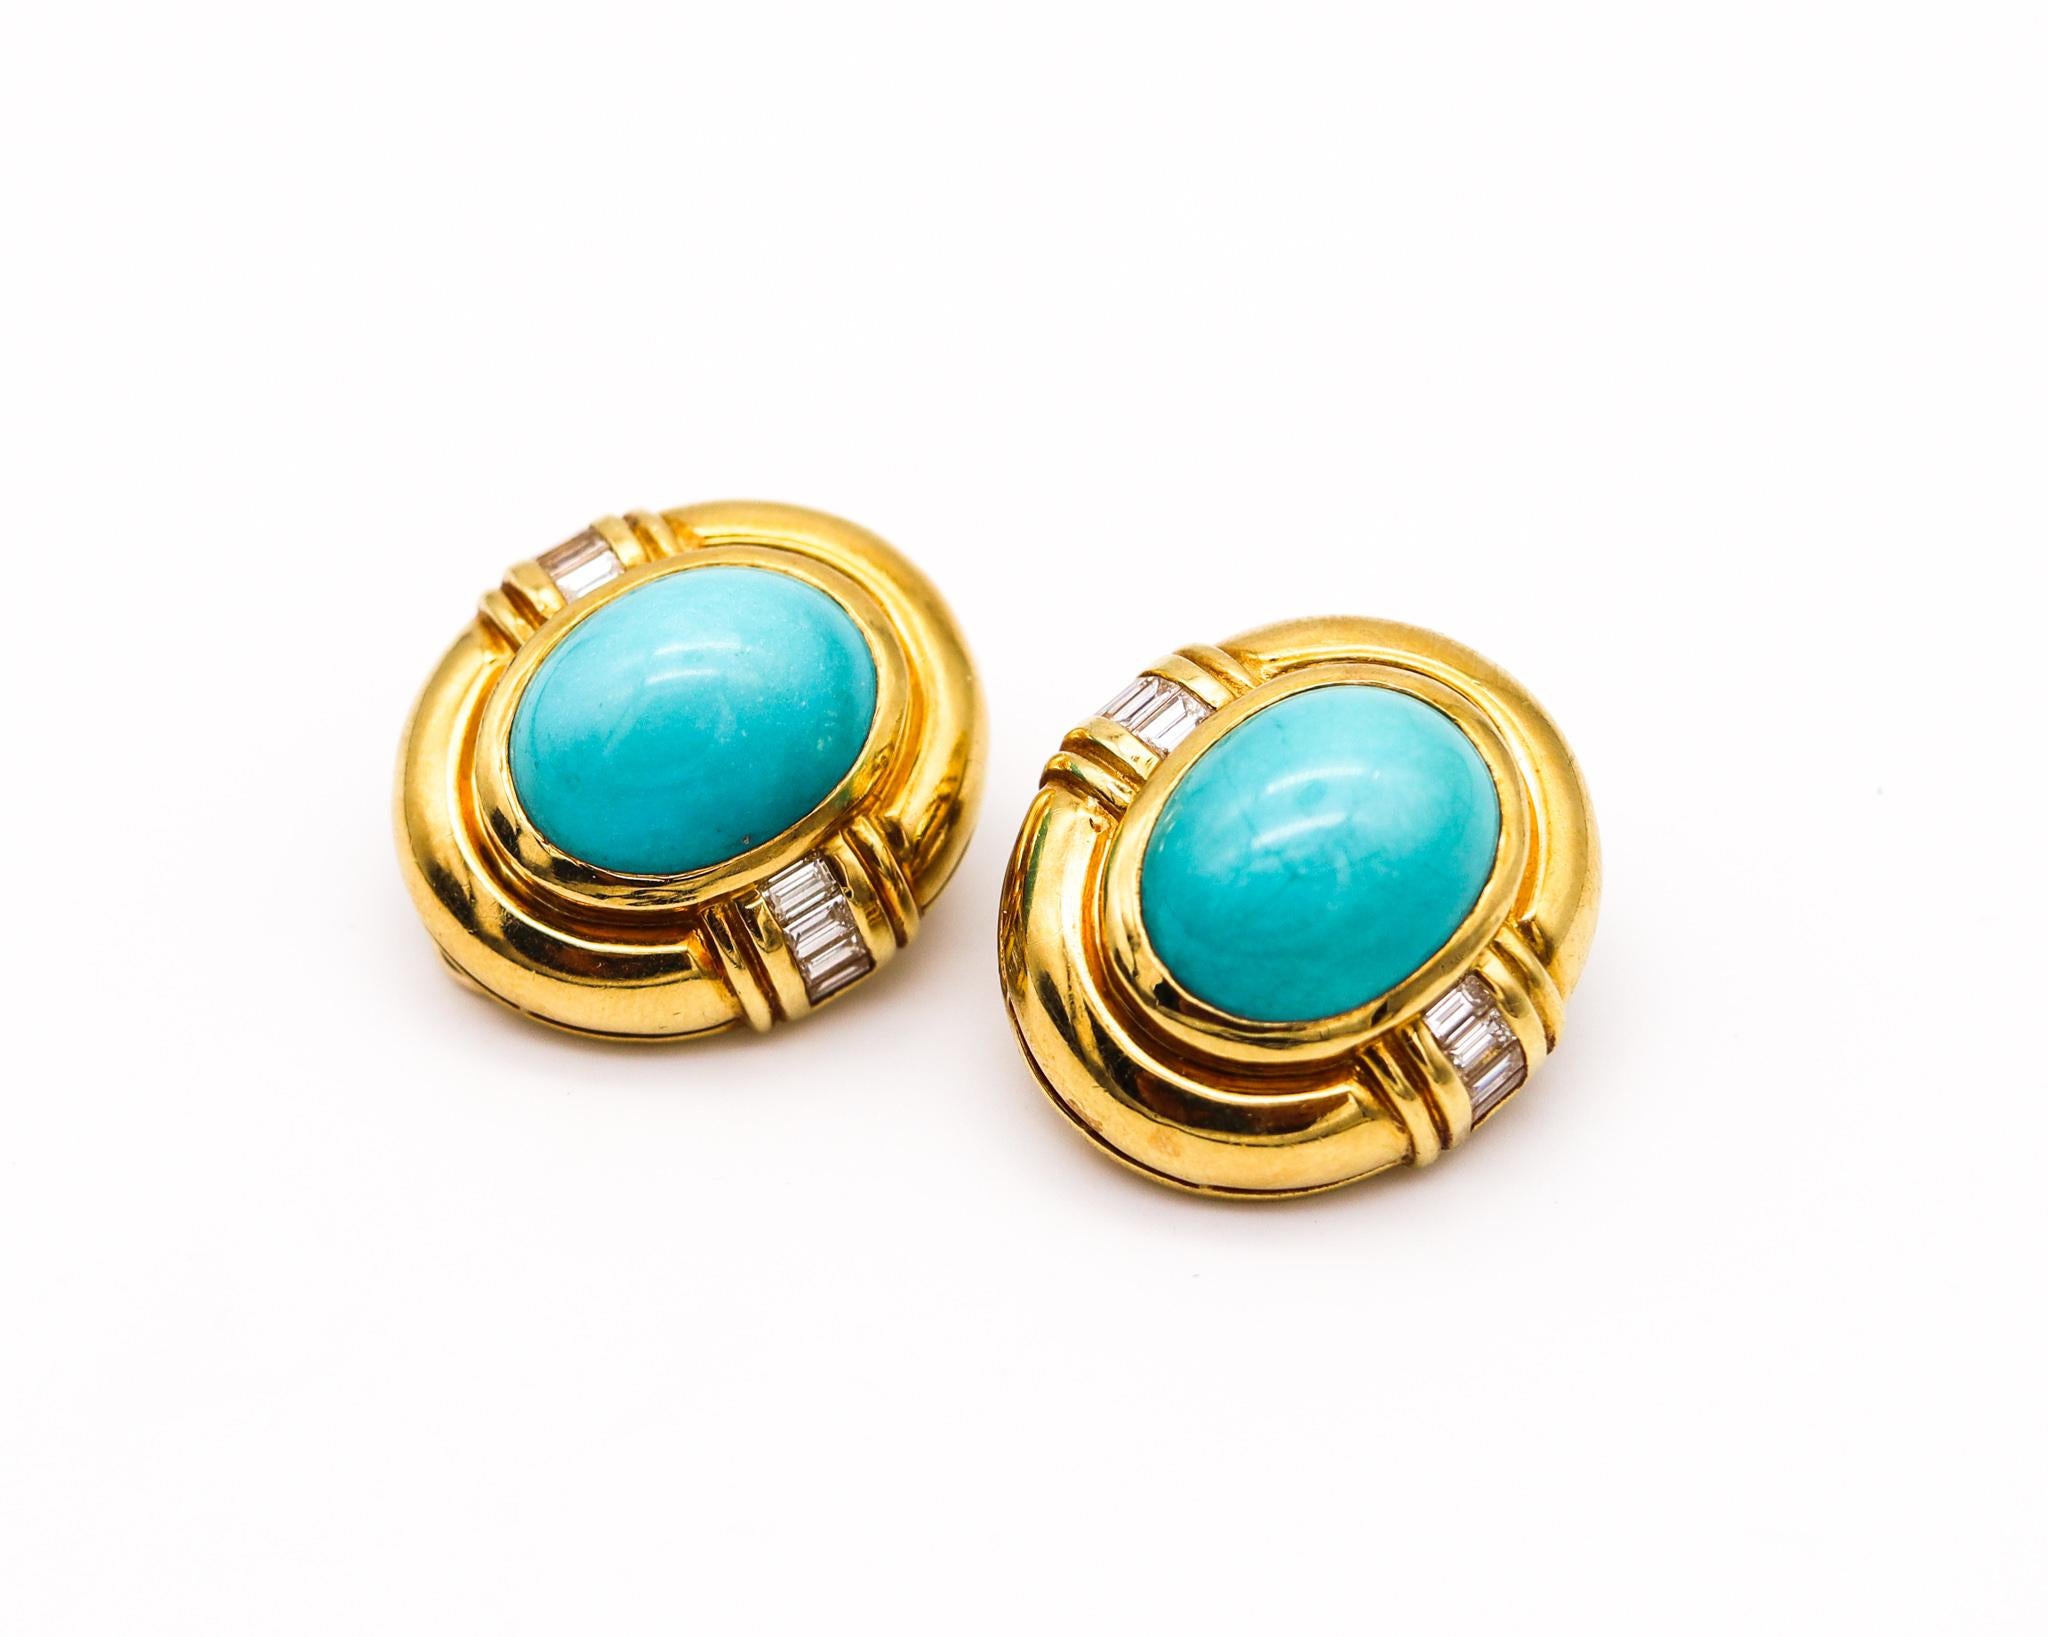 Clips-on earrings with blue turquoises.

Beautiful modernist pair of clip-on earrings crafted in Italy with a bombe oval shape in solid yellow gold of 18 karats. Finished with high polished surfaces and fitted with hinged French omega backs for